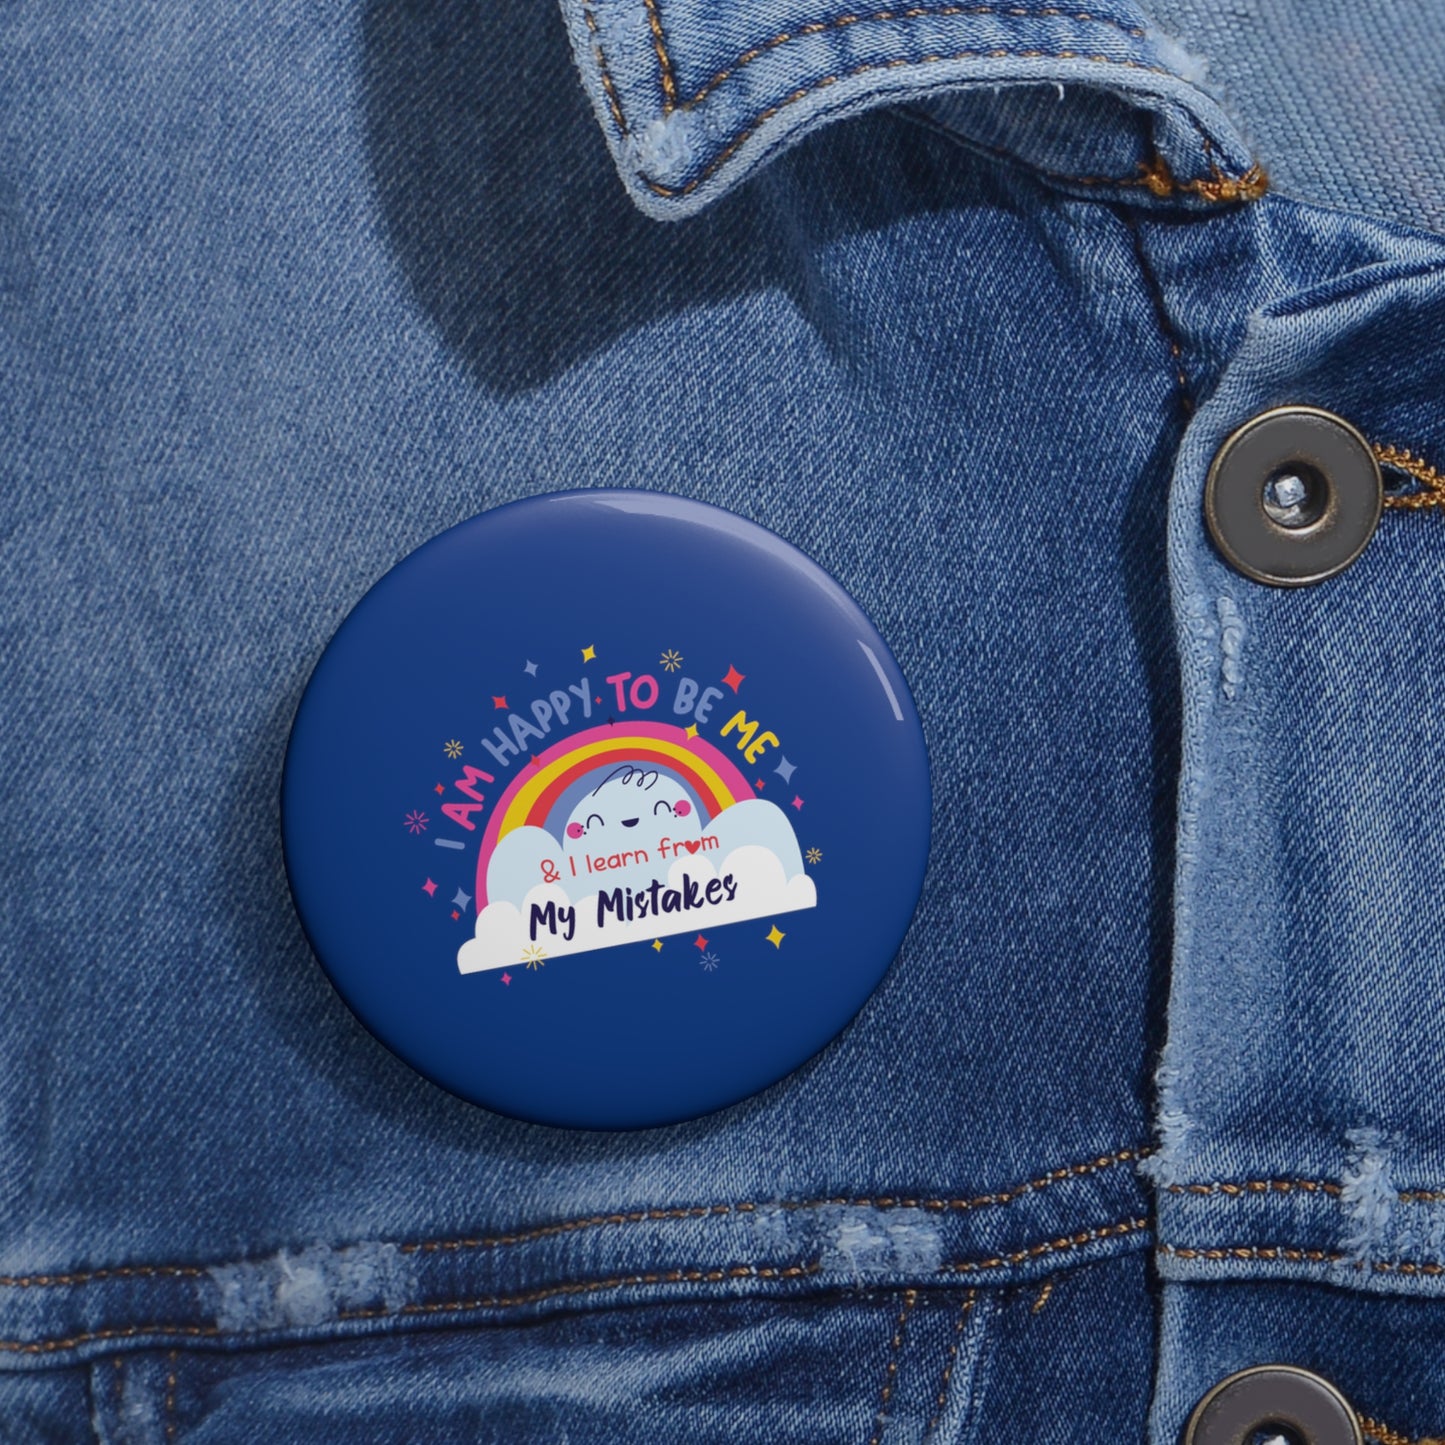 I Am Happy To Be Me - Custom Pin Buttons